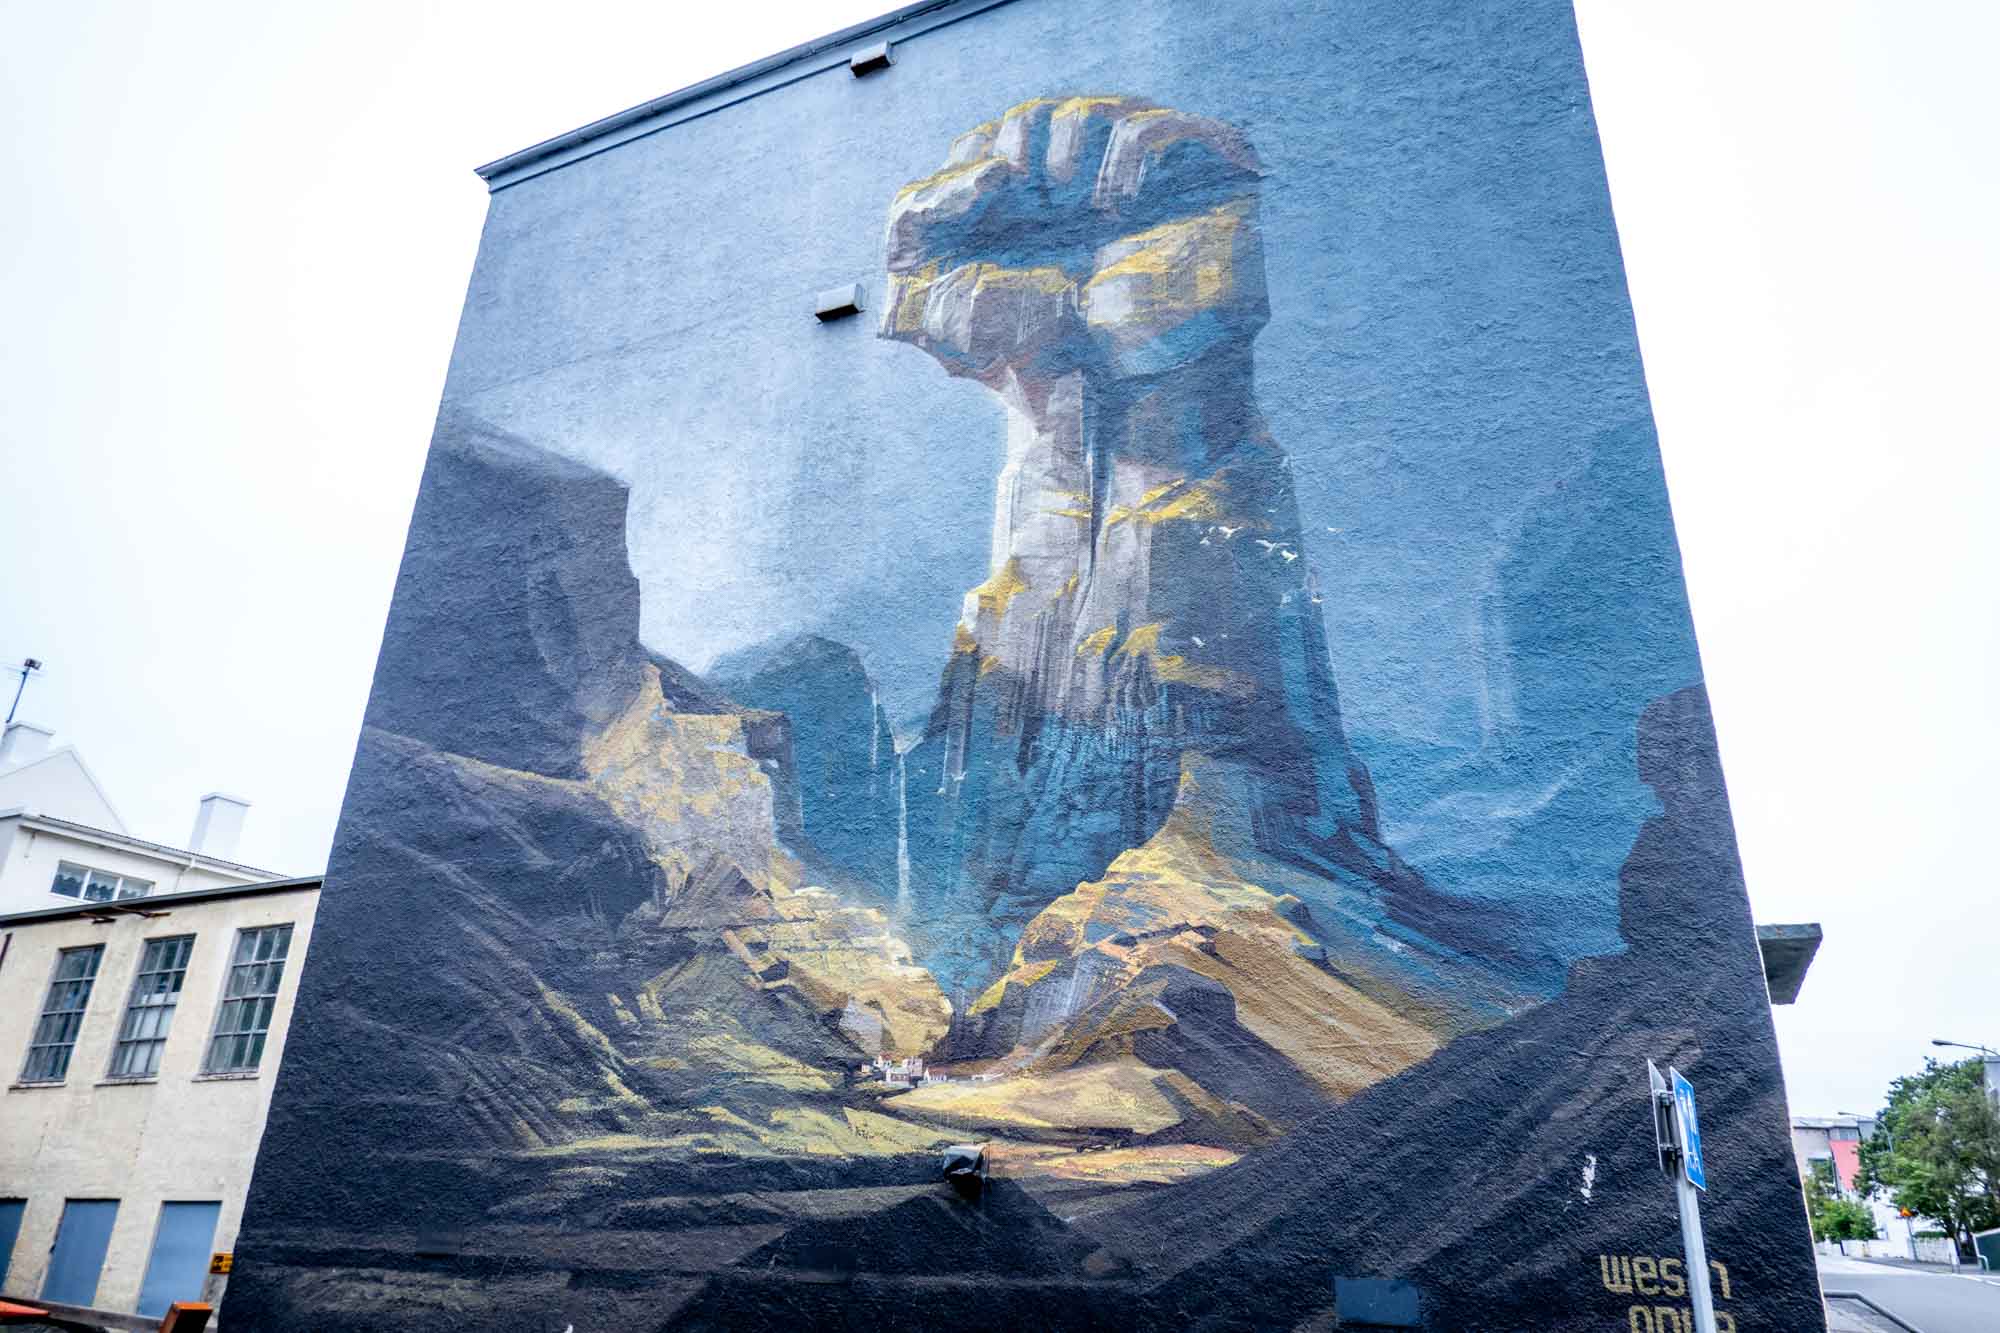 Mural on building of a rock mountain in the shape of a raised fist